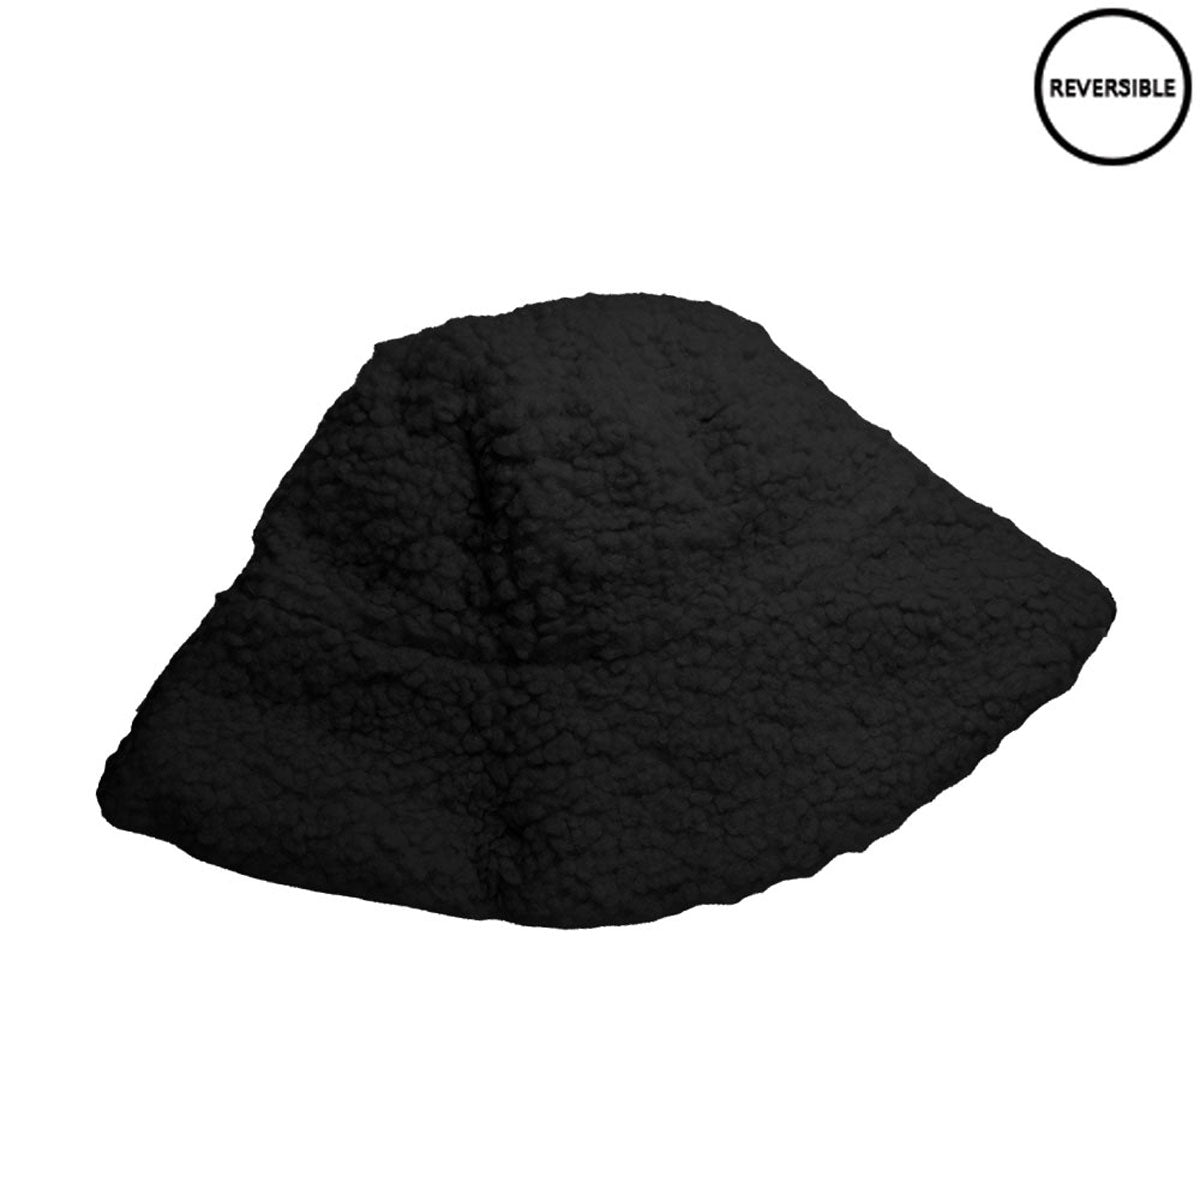 Black Faux Fur Sherpa Reversible Bucket Hat, whether you’re basking under the summer sun at the beach, lounging by the pool, or kicking back with friends at the lake, a great hat can keep you cool and comfortable even when the sun is high in the sky. Large, comfortable, and perfect for keeping the sun off of your face.